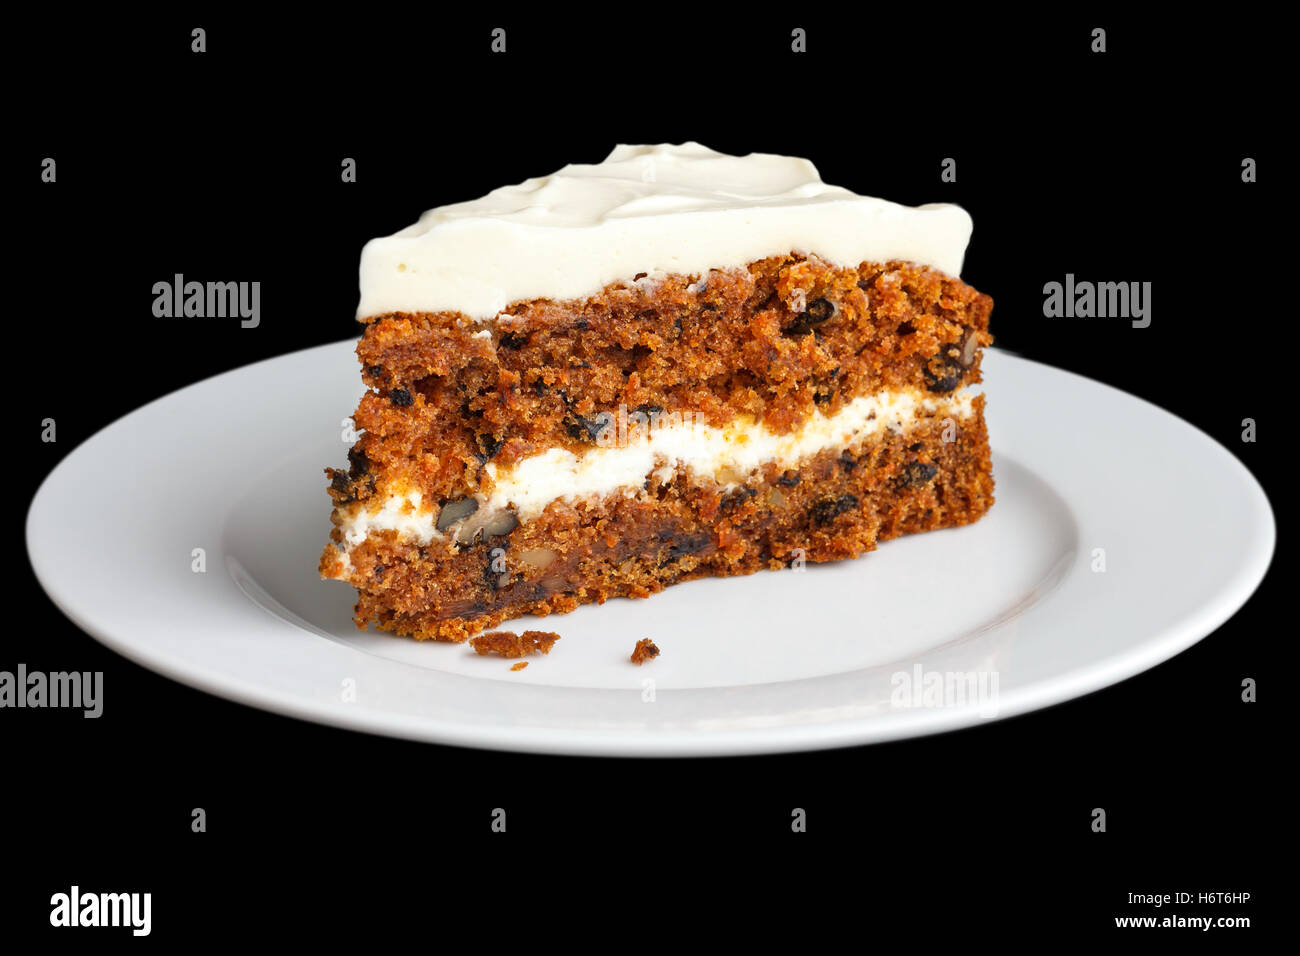 Slice of carrot cake with rich frosting. On plate. Stock Photo